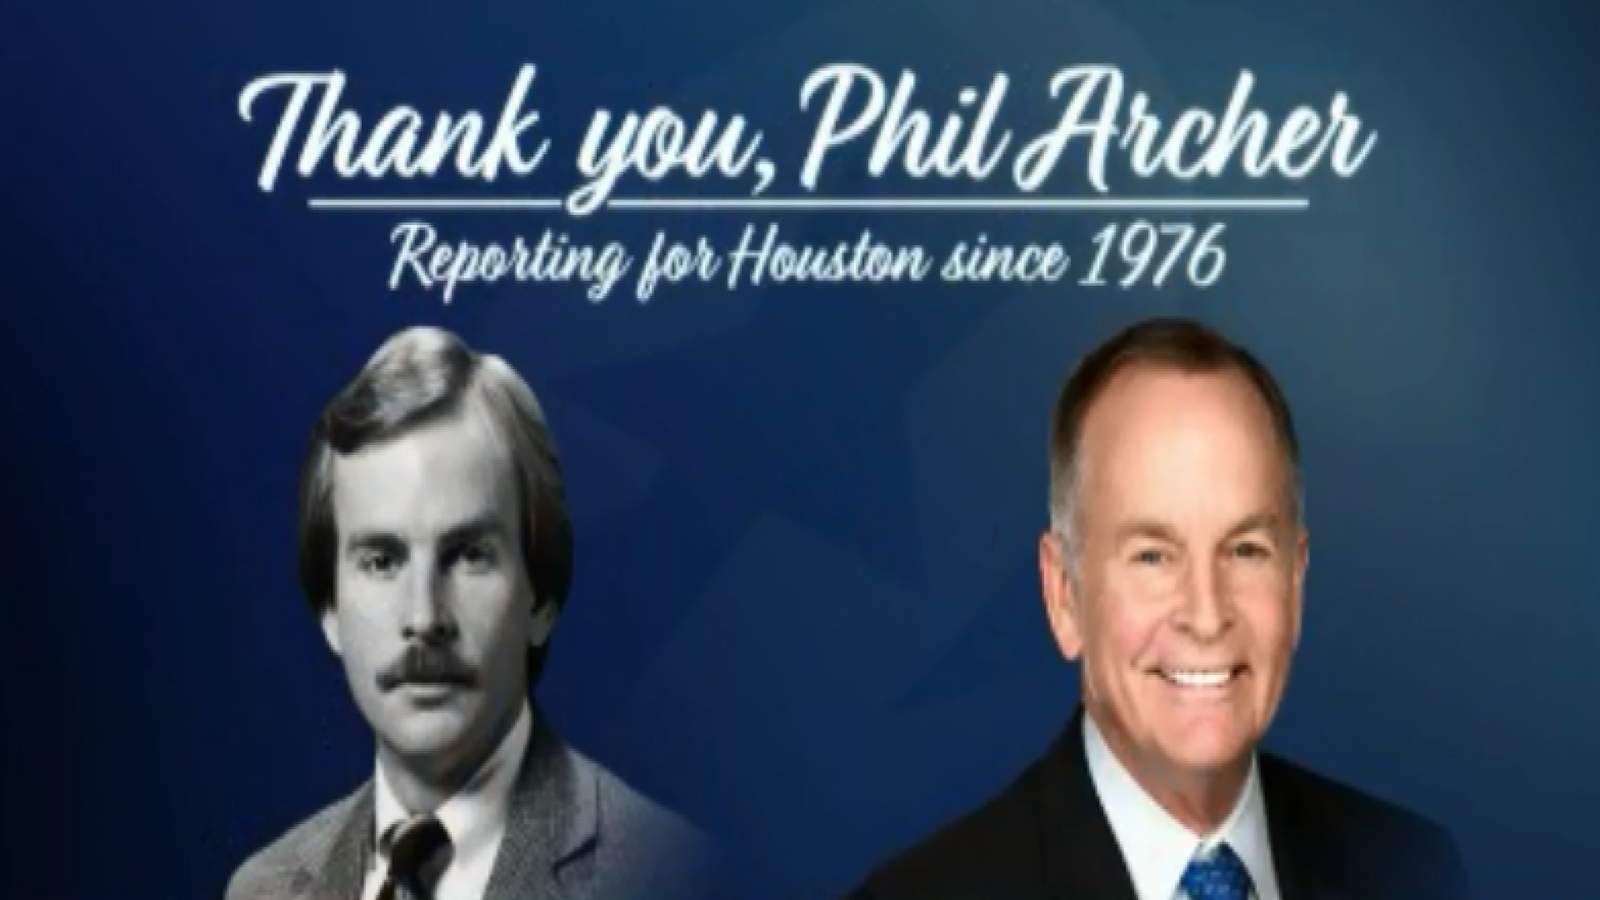 KPRC 2’s Phil Archer retiring after telling Houston’s story for nearly 45 years